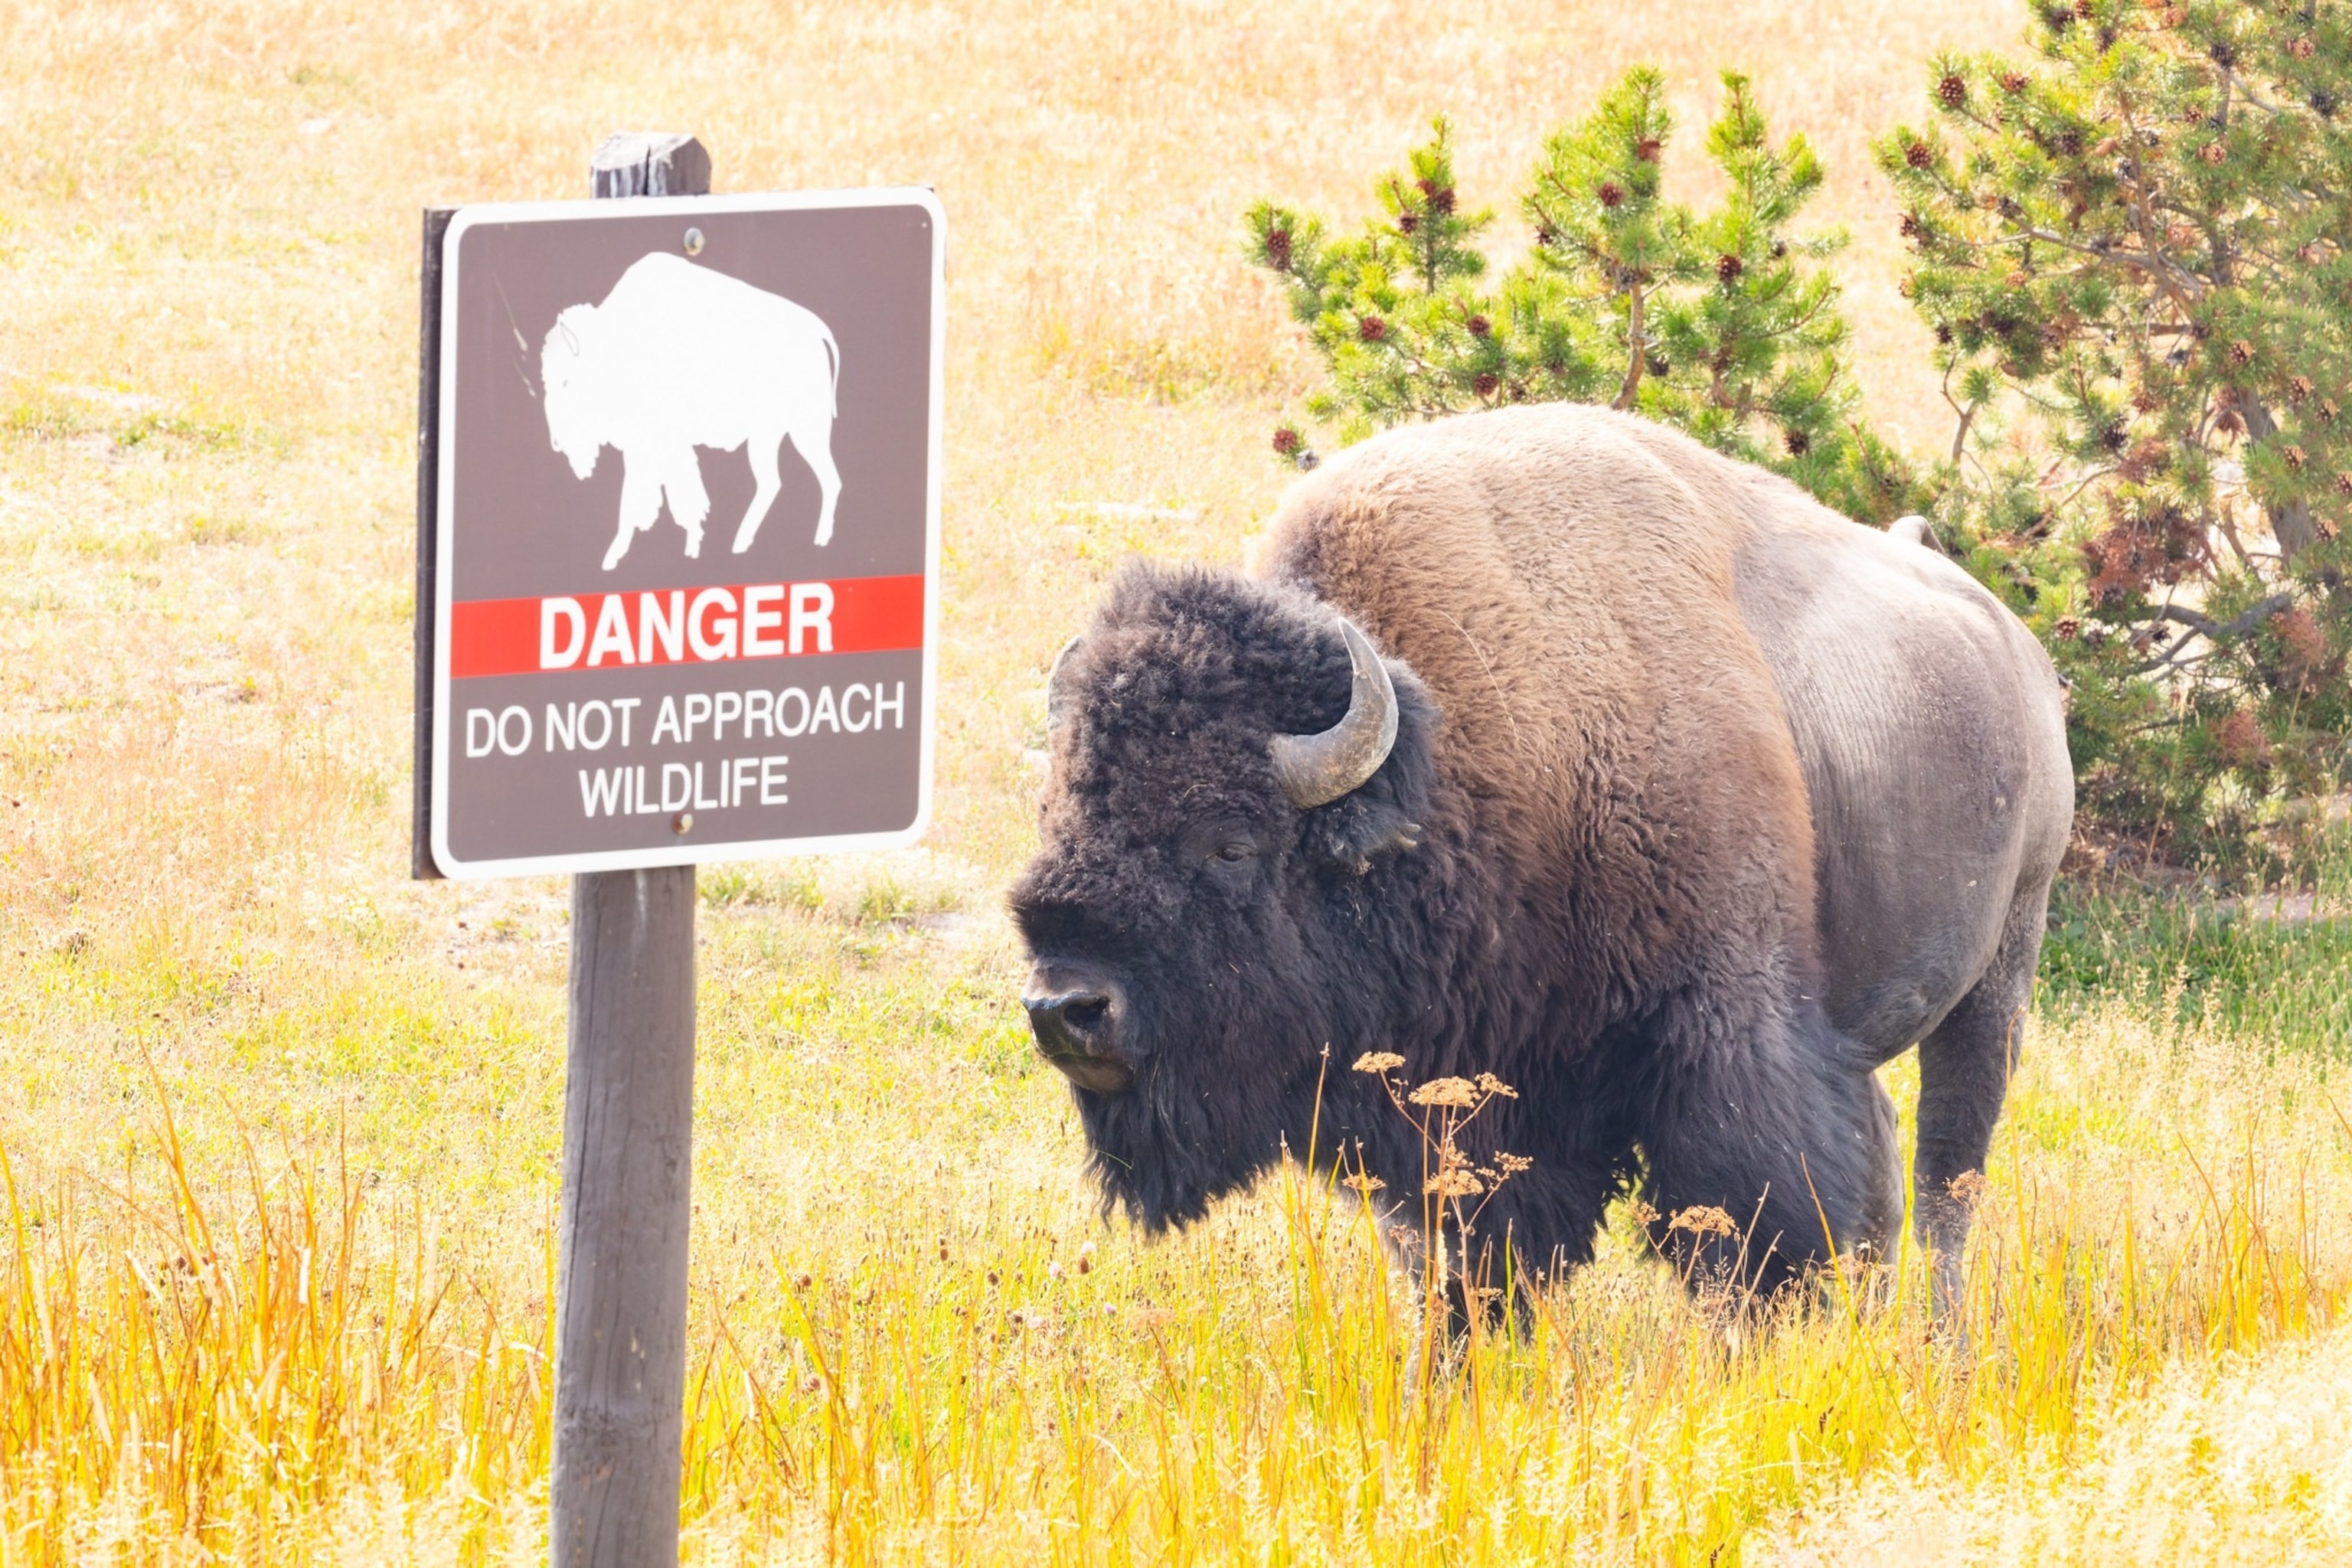 PHOTO: A 40-year-old man who allegedly kicked a bison in the leg while under the influence of alcohol at Yellowstone National Park, was injured by the animal and arrested, officials say.